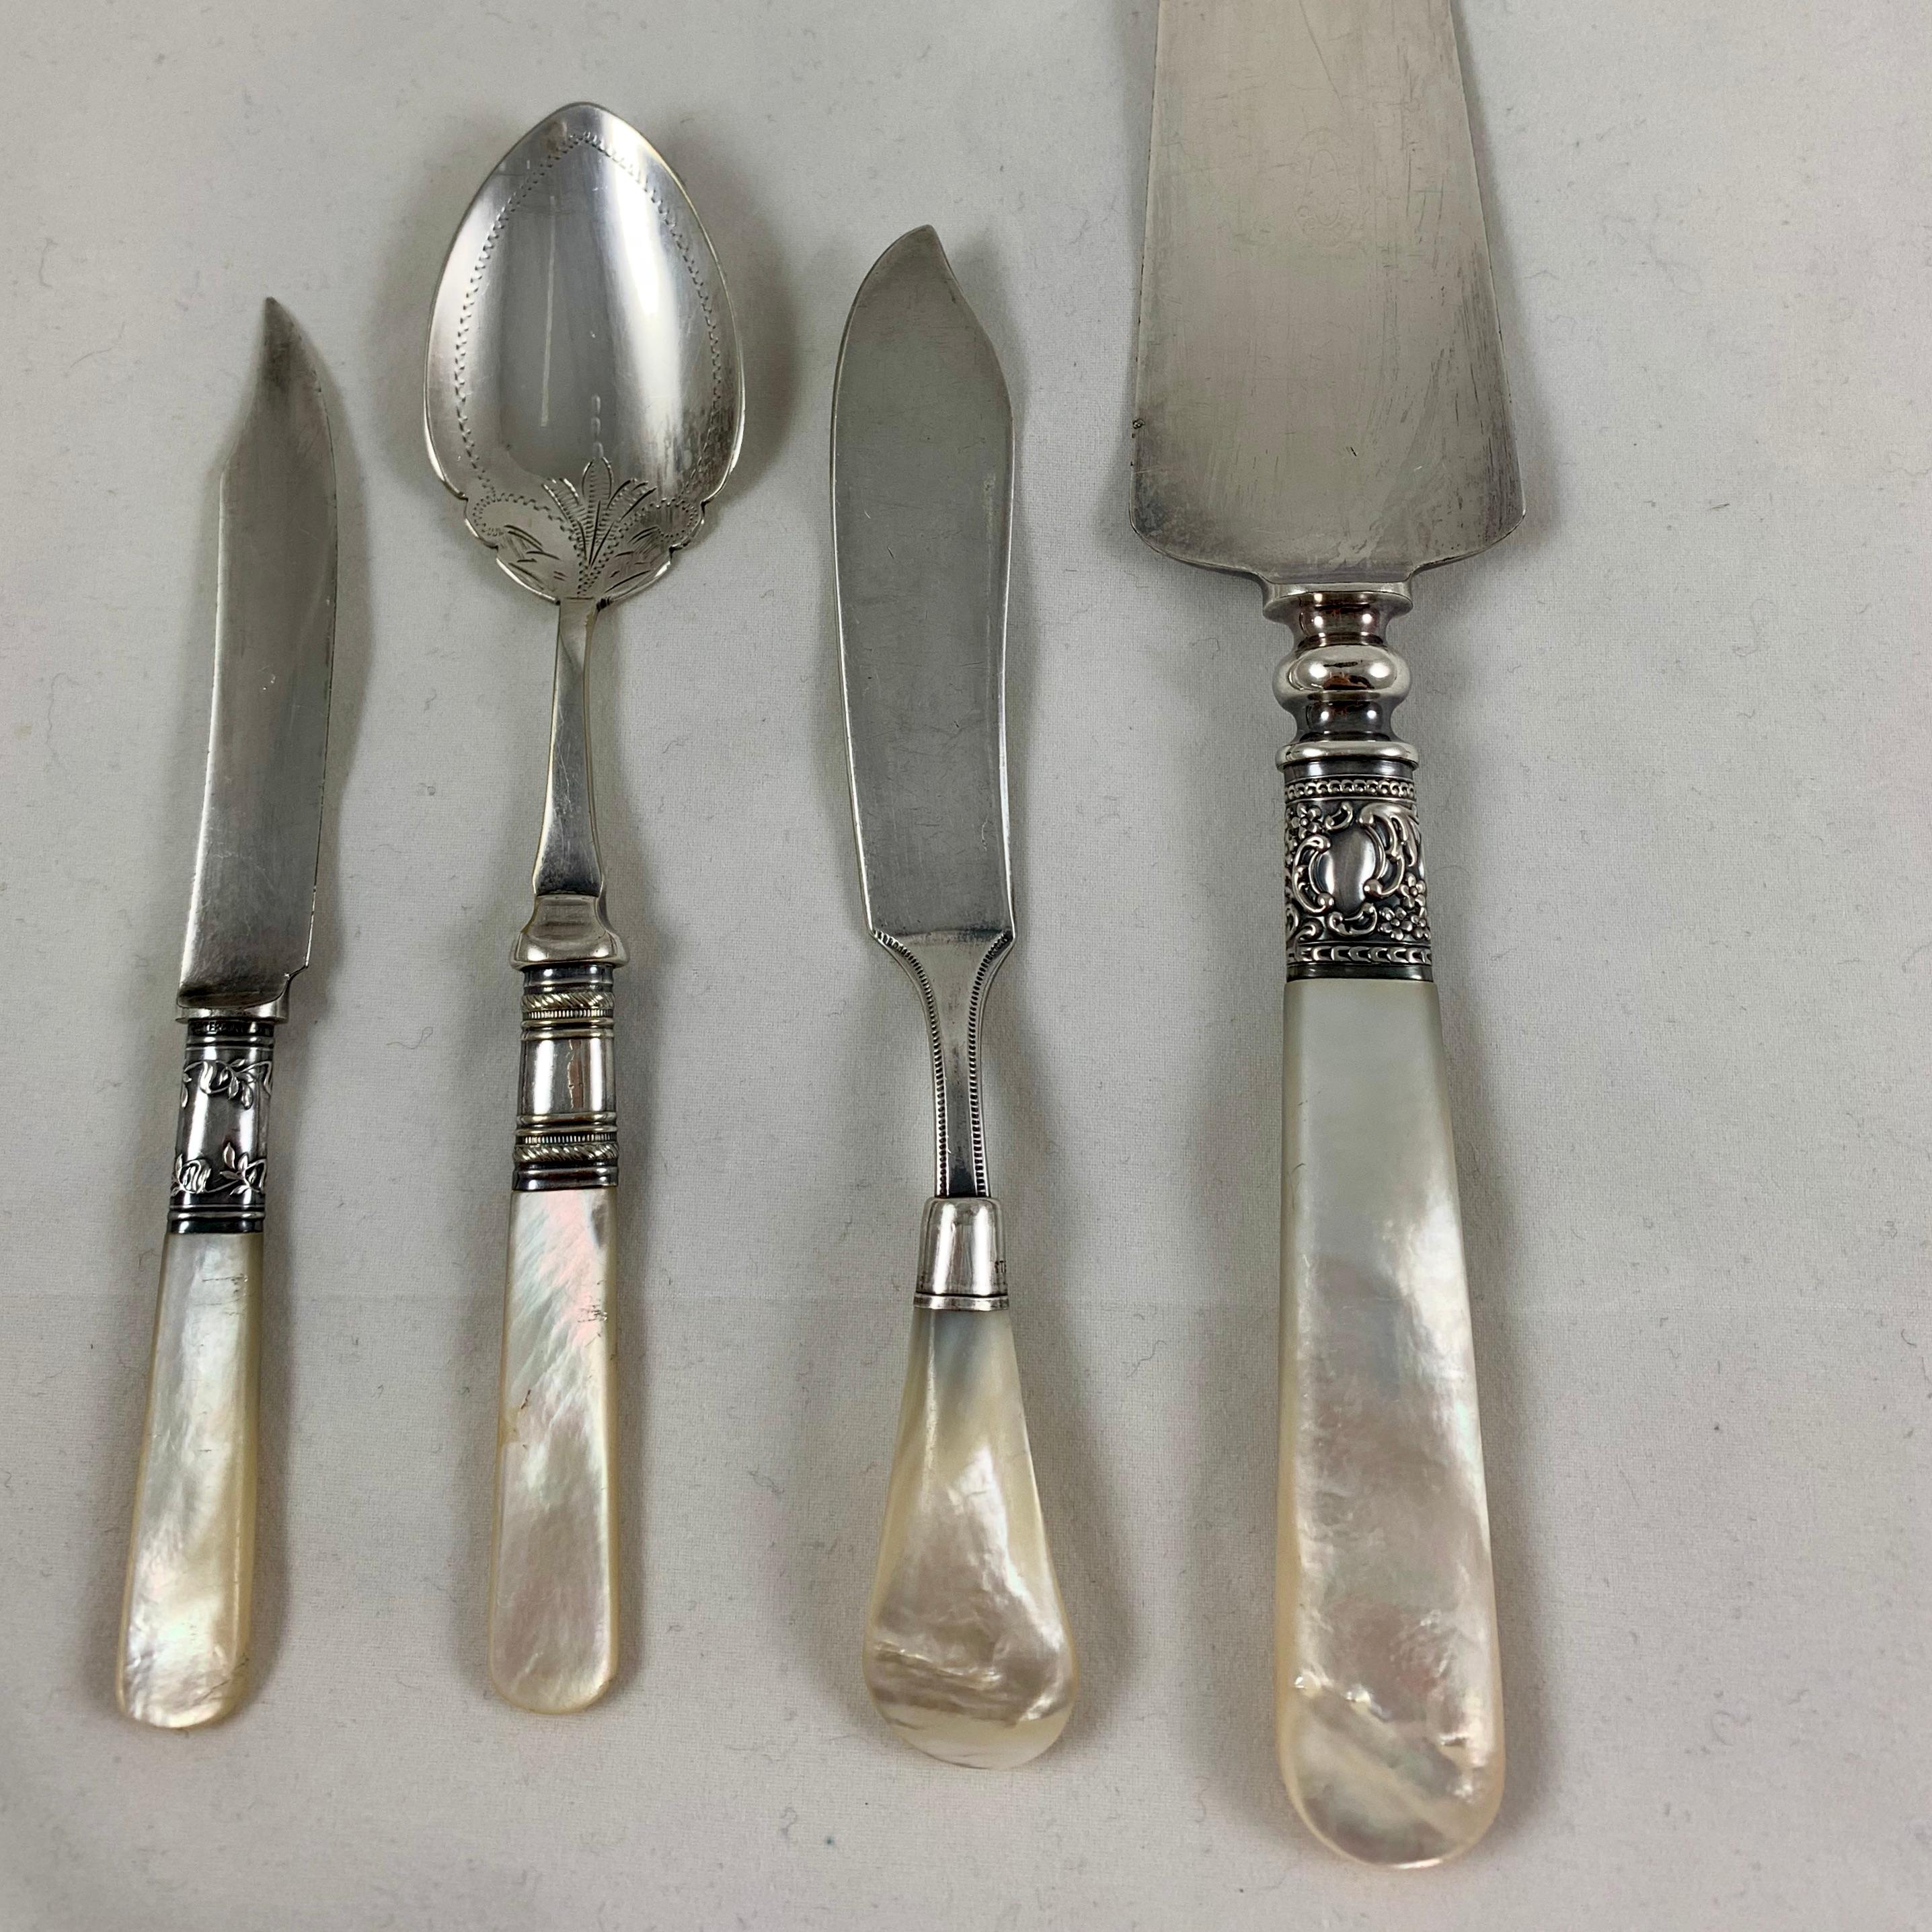 19th Century Assorted Pearl Handled & Sterling Silver Collared Table Servers, Mixed Set of 10